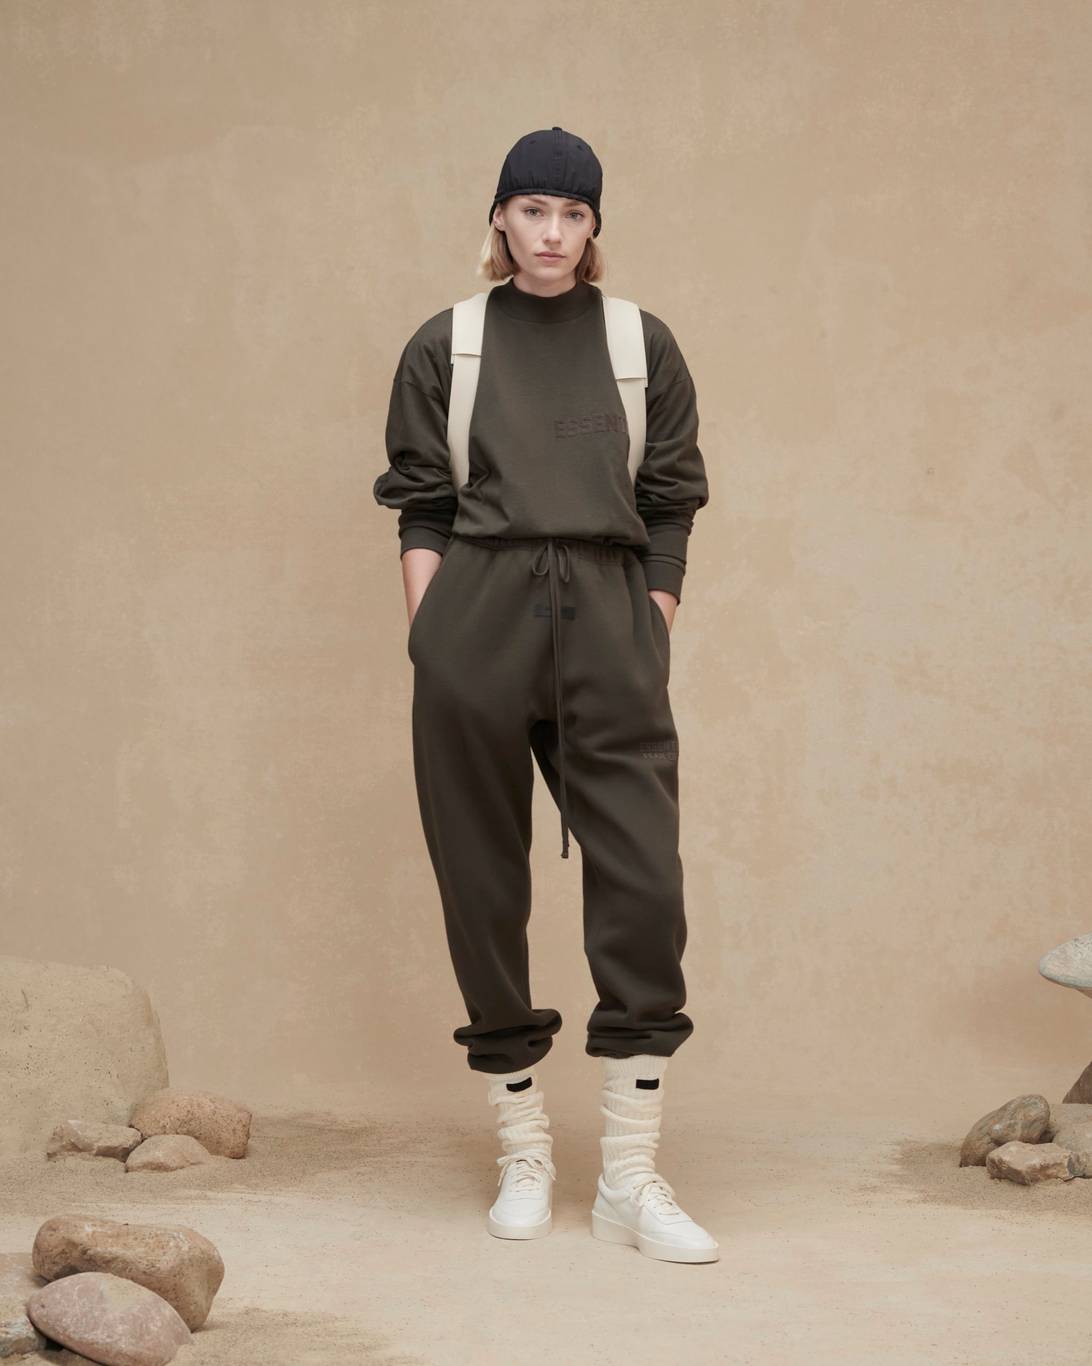 Fear Of God Essentials Rolls Out the Black Collection